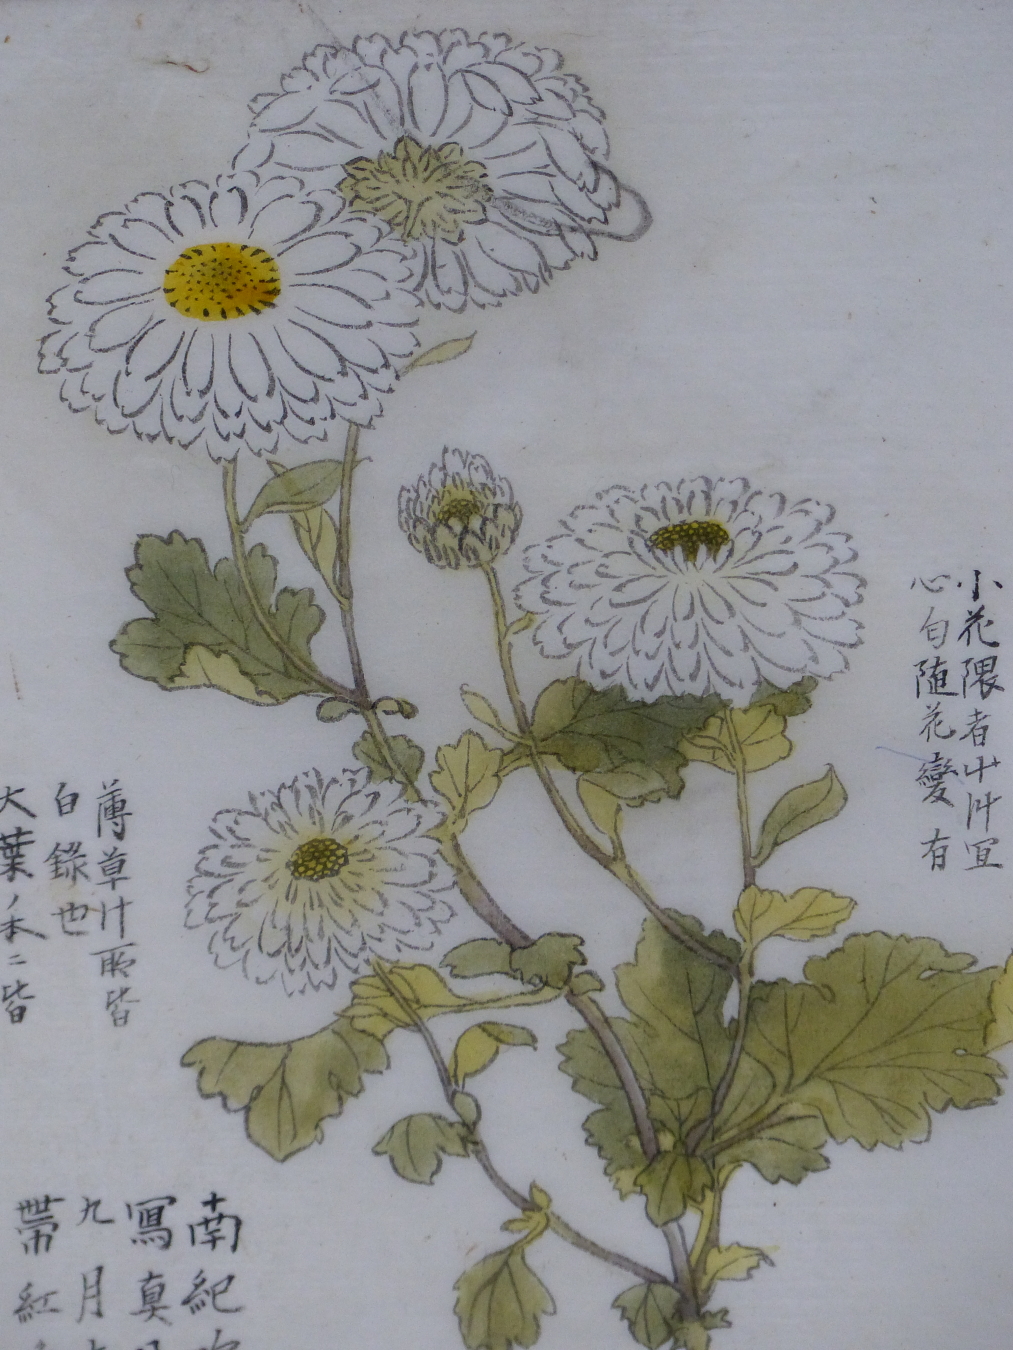 ORIENTAL SCHOOL, 19THC. CHRYSANTHEMUMS AND KANJI TEXT. INK AND WASH ON THIN RICE PAPER, 23 X 17 CM.